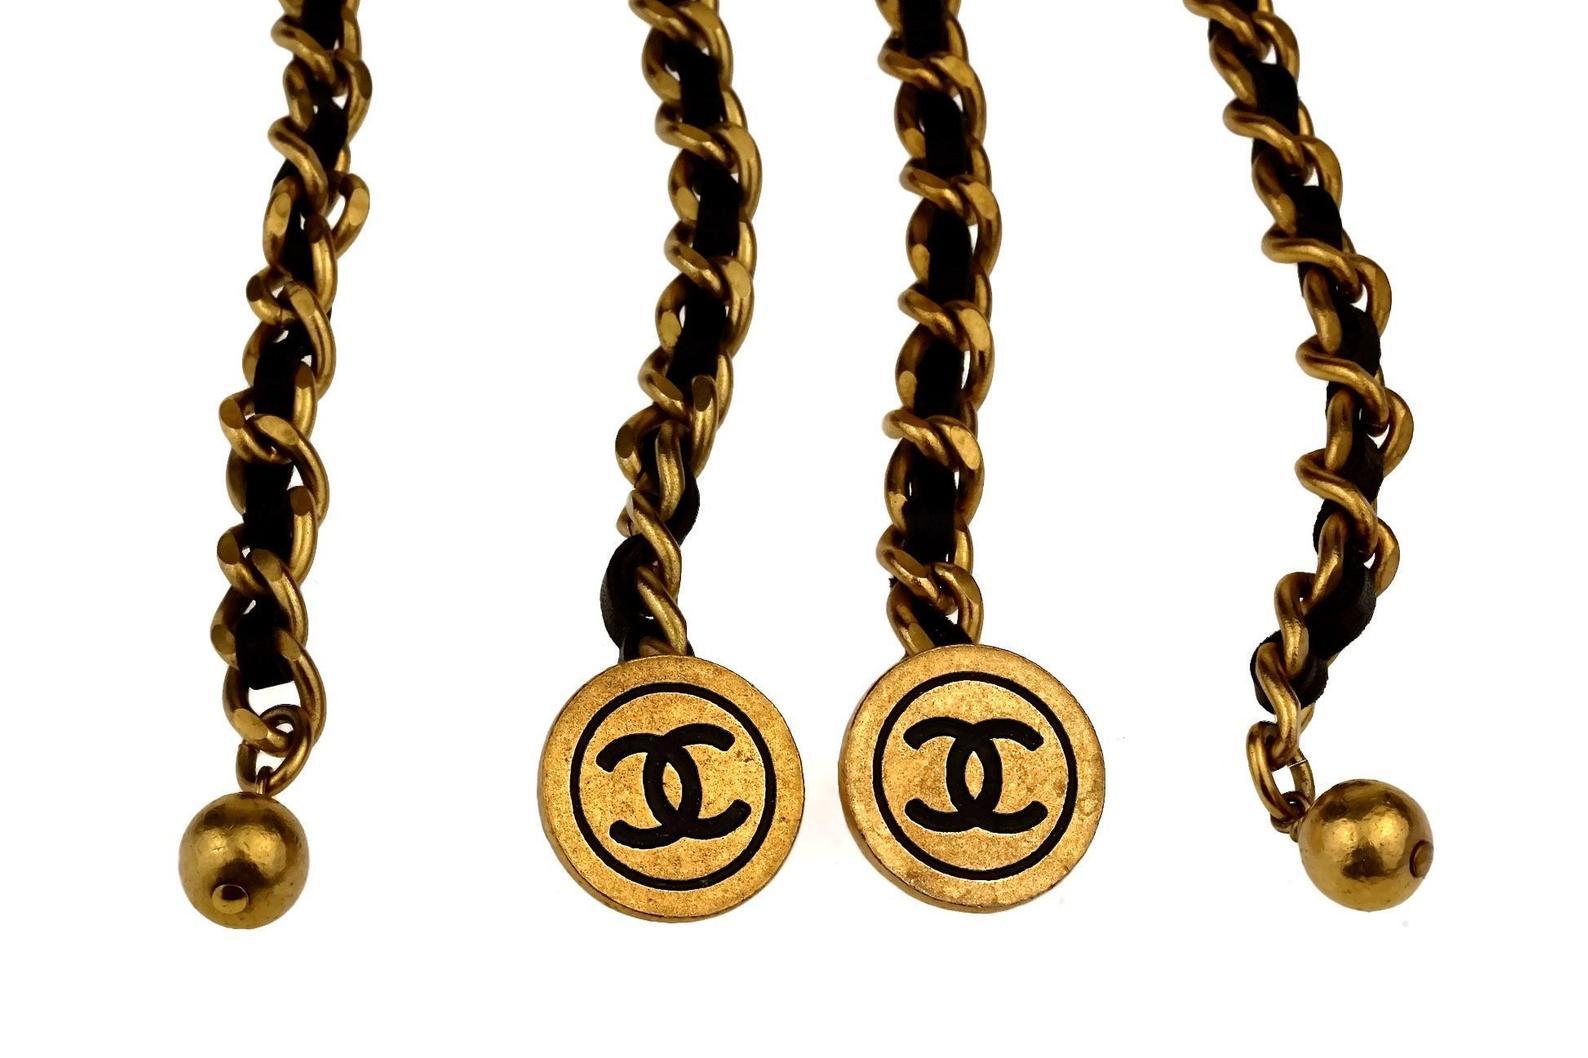 Vintage 1993 CHANEL Leather Chain CC Medallion Cufflinks Bracelet

Measurements:
Length: 12.20 inches (31 cm)
Medallions: 0.78 inch (2 cm)

Features:
- 100% Authentic CHANEL.
- Medallions with CC logos.
- Iconic CHANEL leather and chain cufflinks/